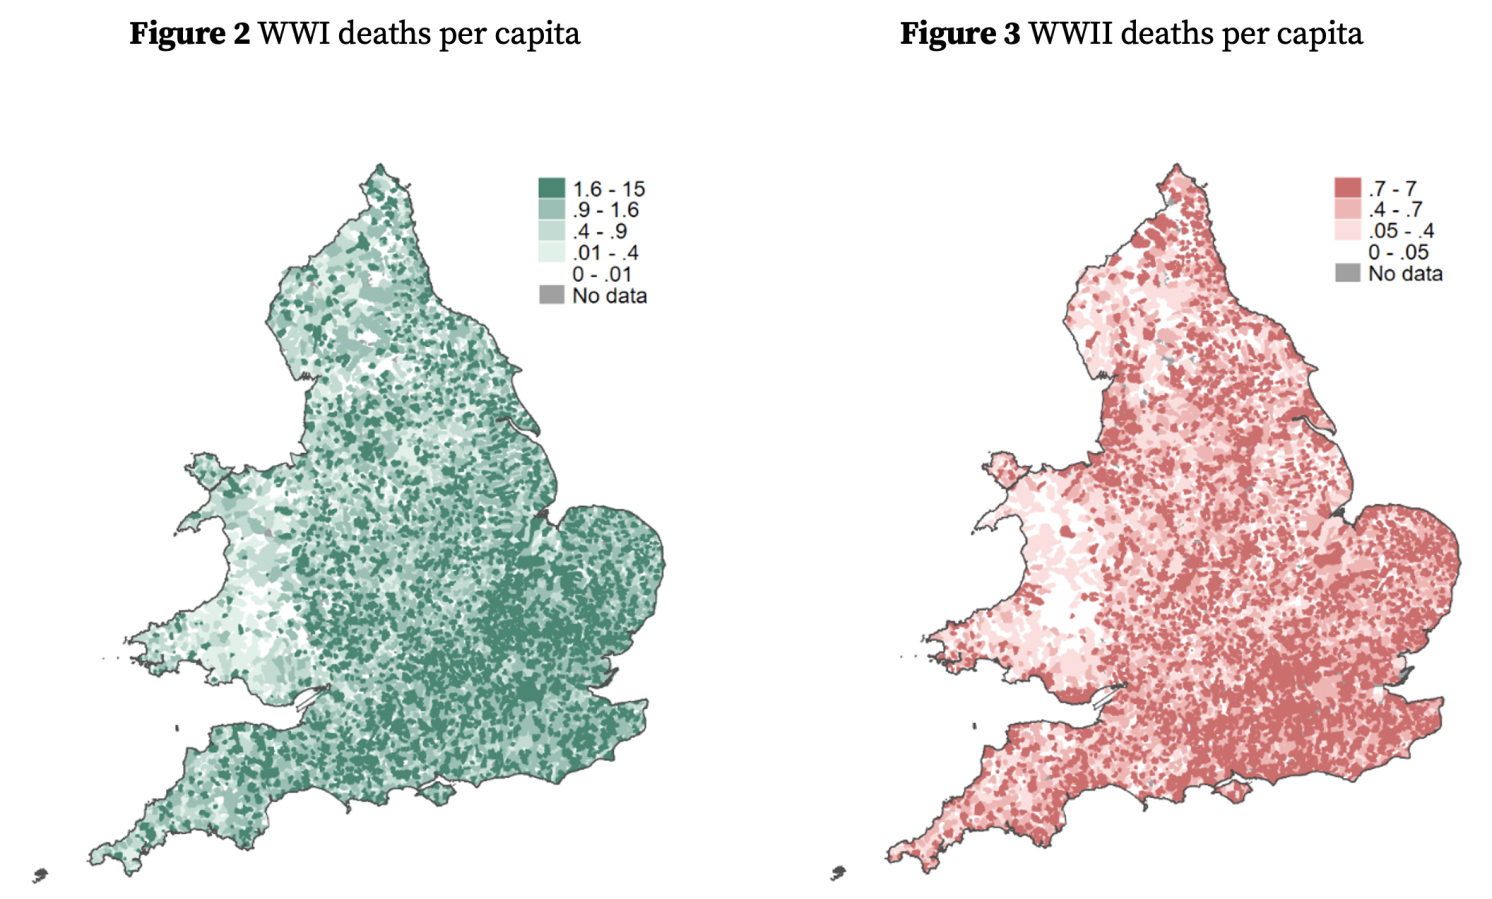 Figures 2 and 3, deaths per capita in World War 1 and World War 2